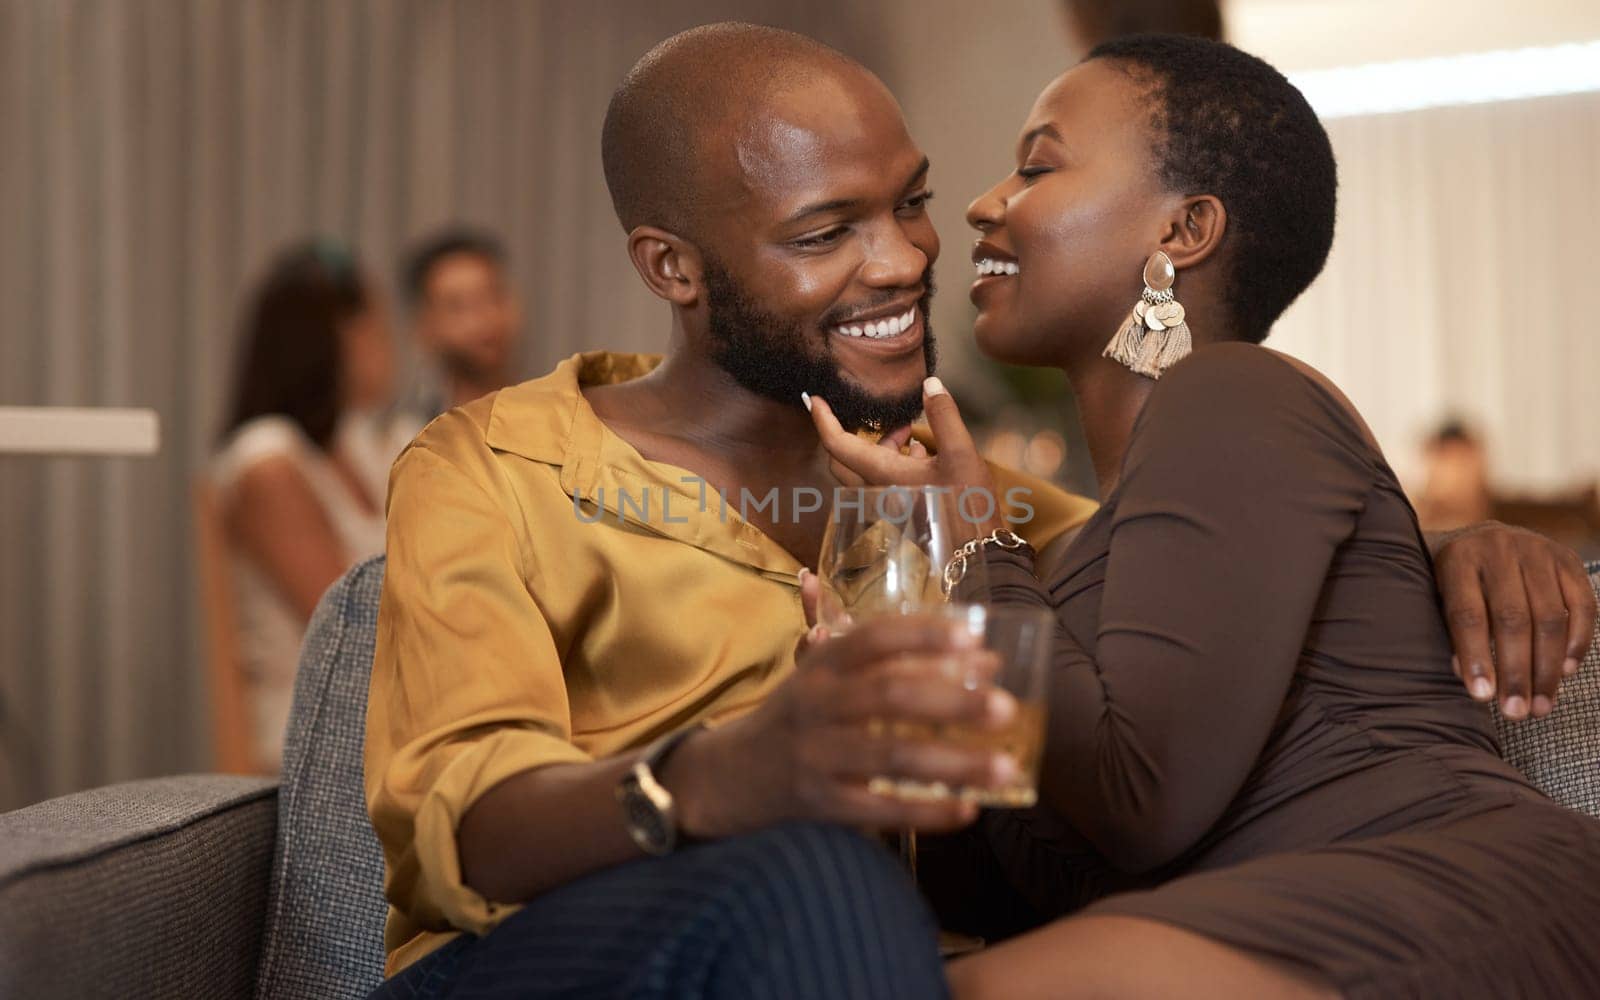 Love, event or couple of friends at a party in celebration of new years drinking wine or whiskey on holiday. Romance, black woman and black man talking, embrace or bonding on a relaxing romantic date.